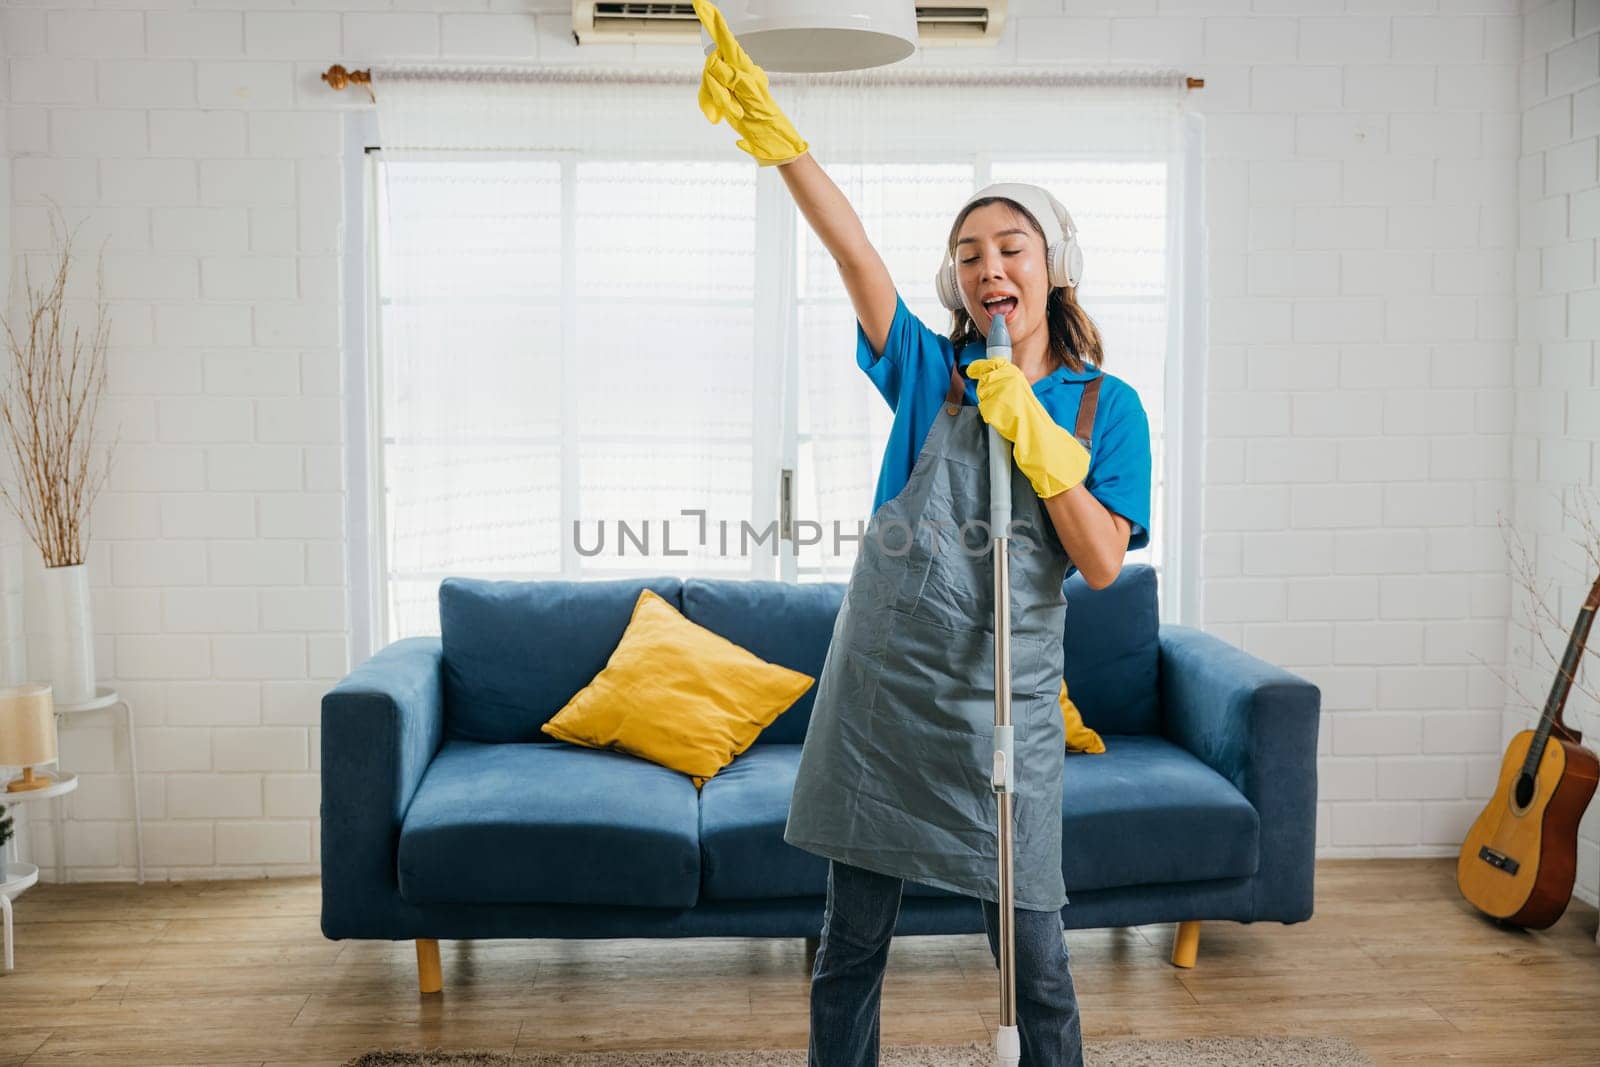 Happy Asian housewife finds joy in cleaning singing her favorite song using mop as microphone during domestic work. Dancing and cleaning in living room cheerful maid enjoying her routine.